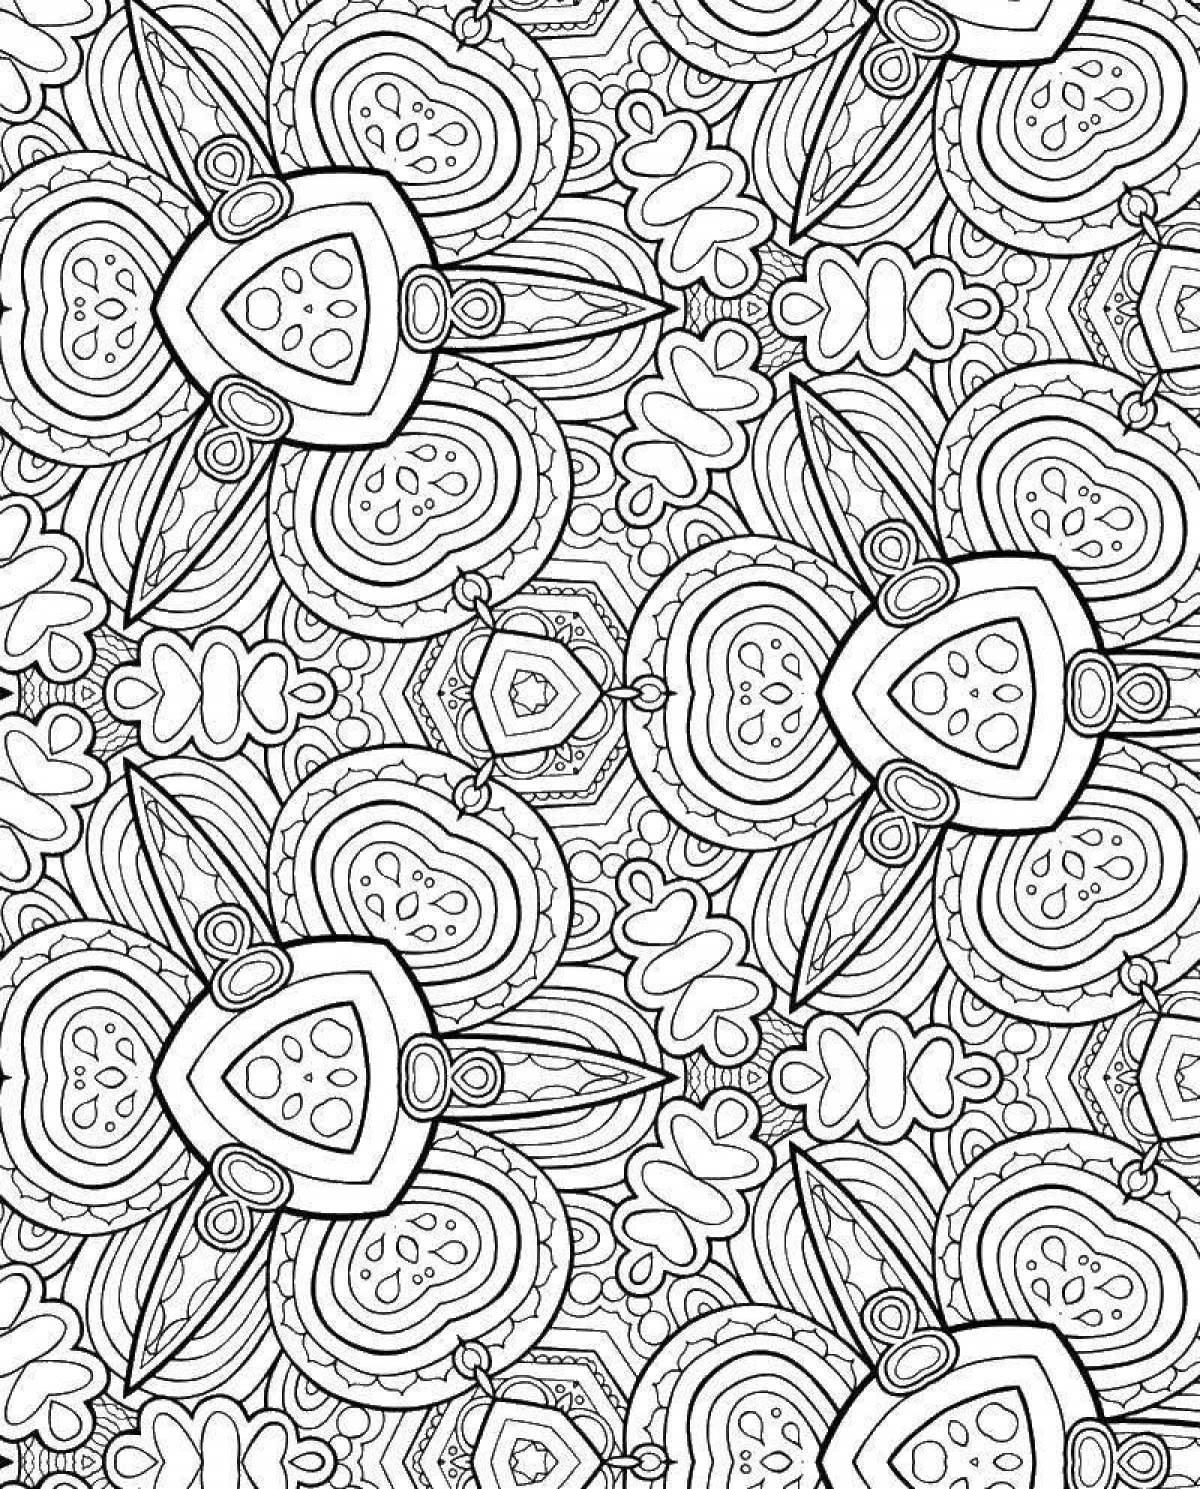 Fun coloring pages magical patterns